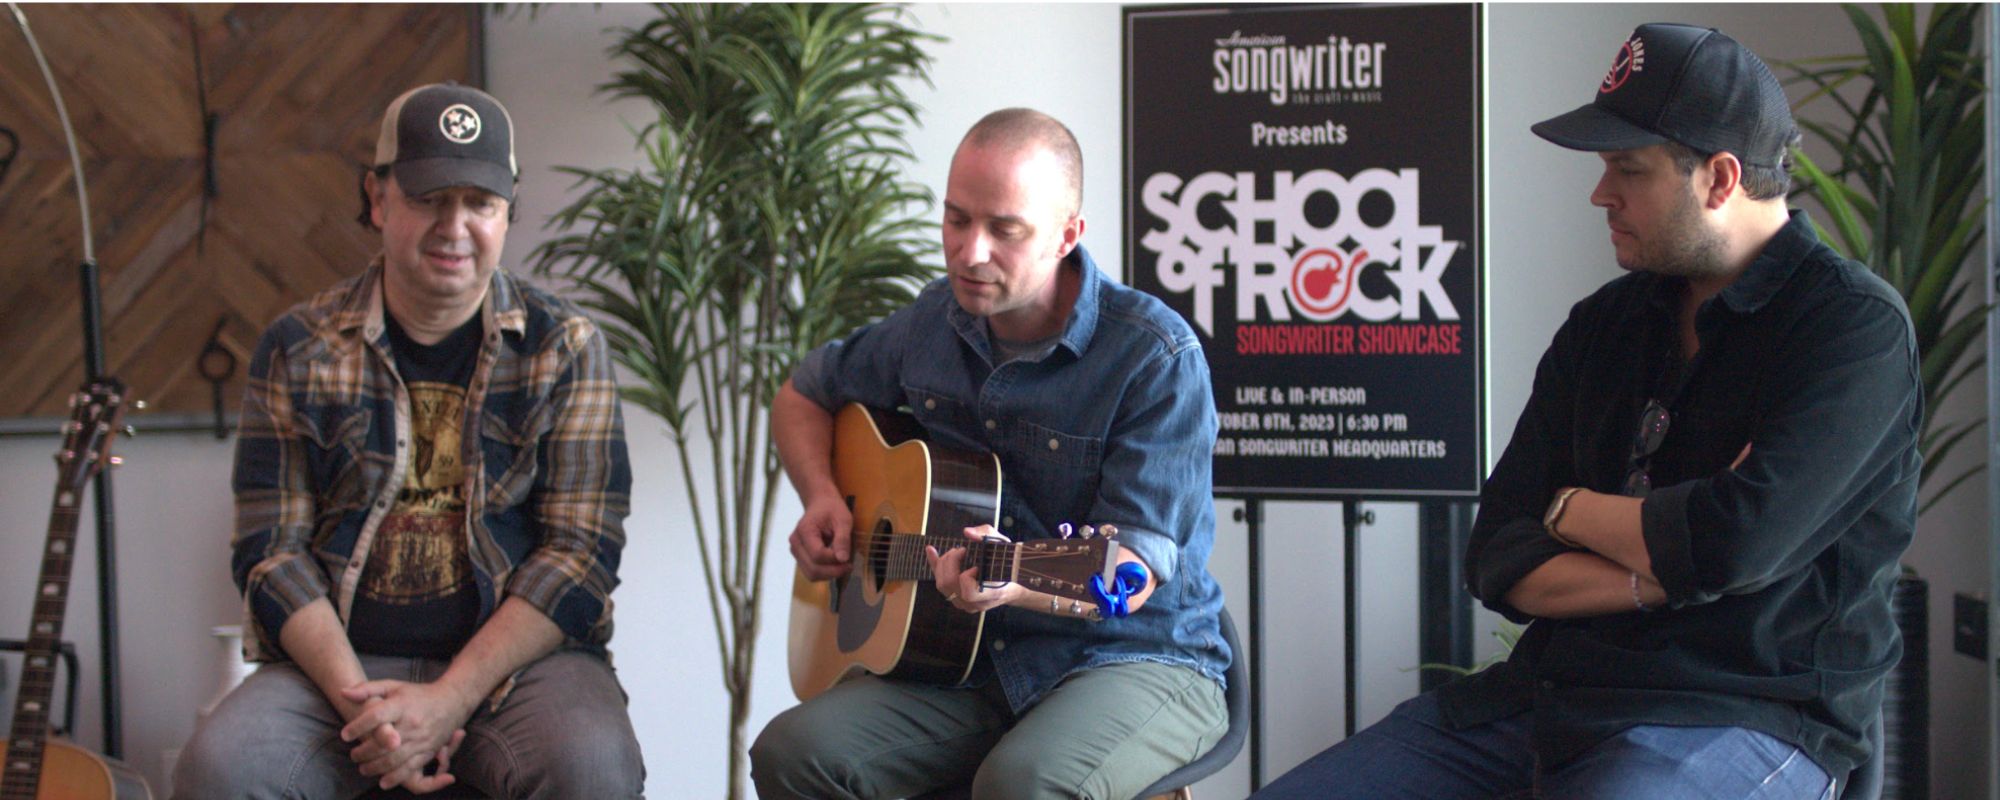 American Songwriter Teams with School of Rock for Their Songwriter Showcase Program